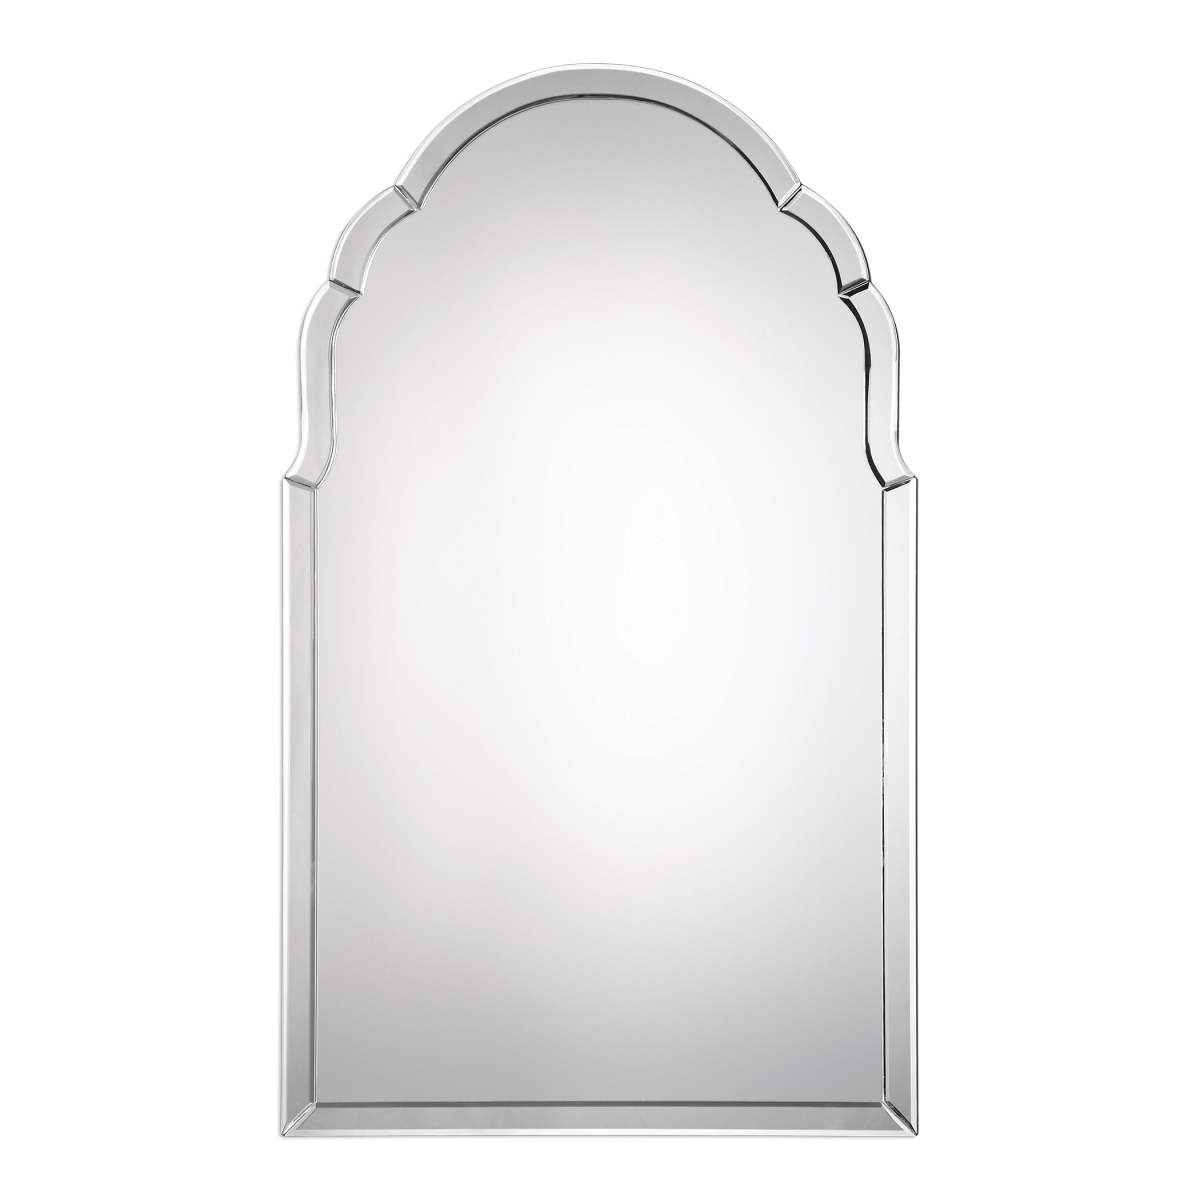 Picture of 212 Main 09149 Brayden Frameless Arched Mirror